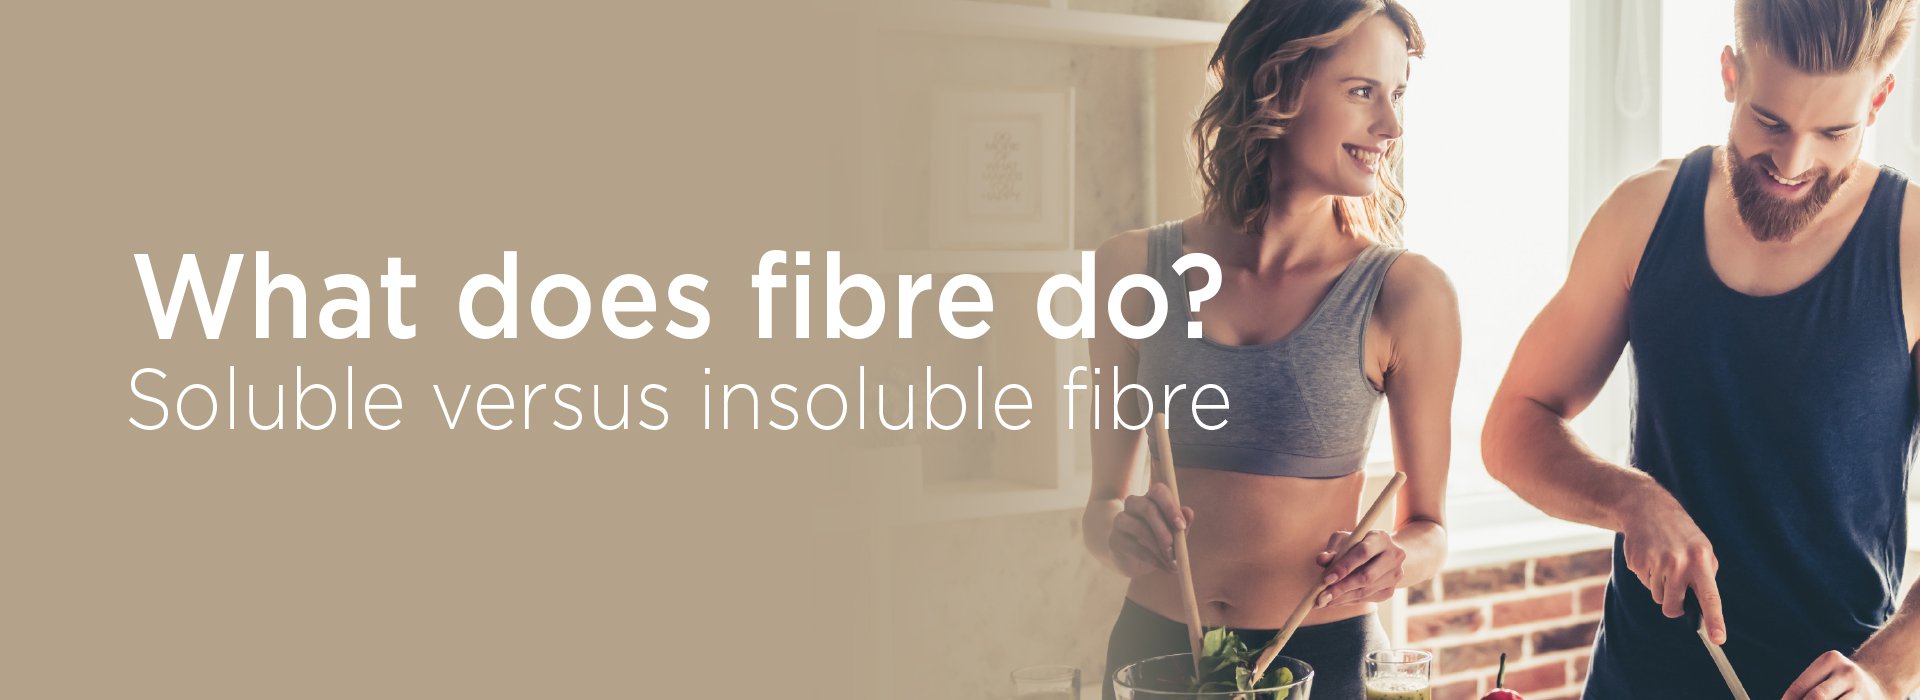 New Image International:Fibre - What does it do?